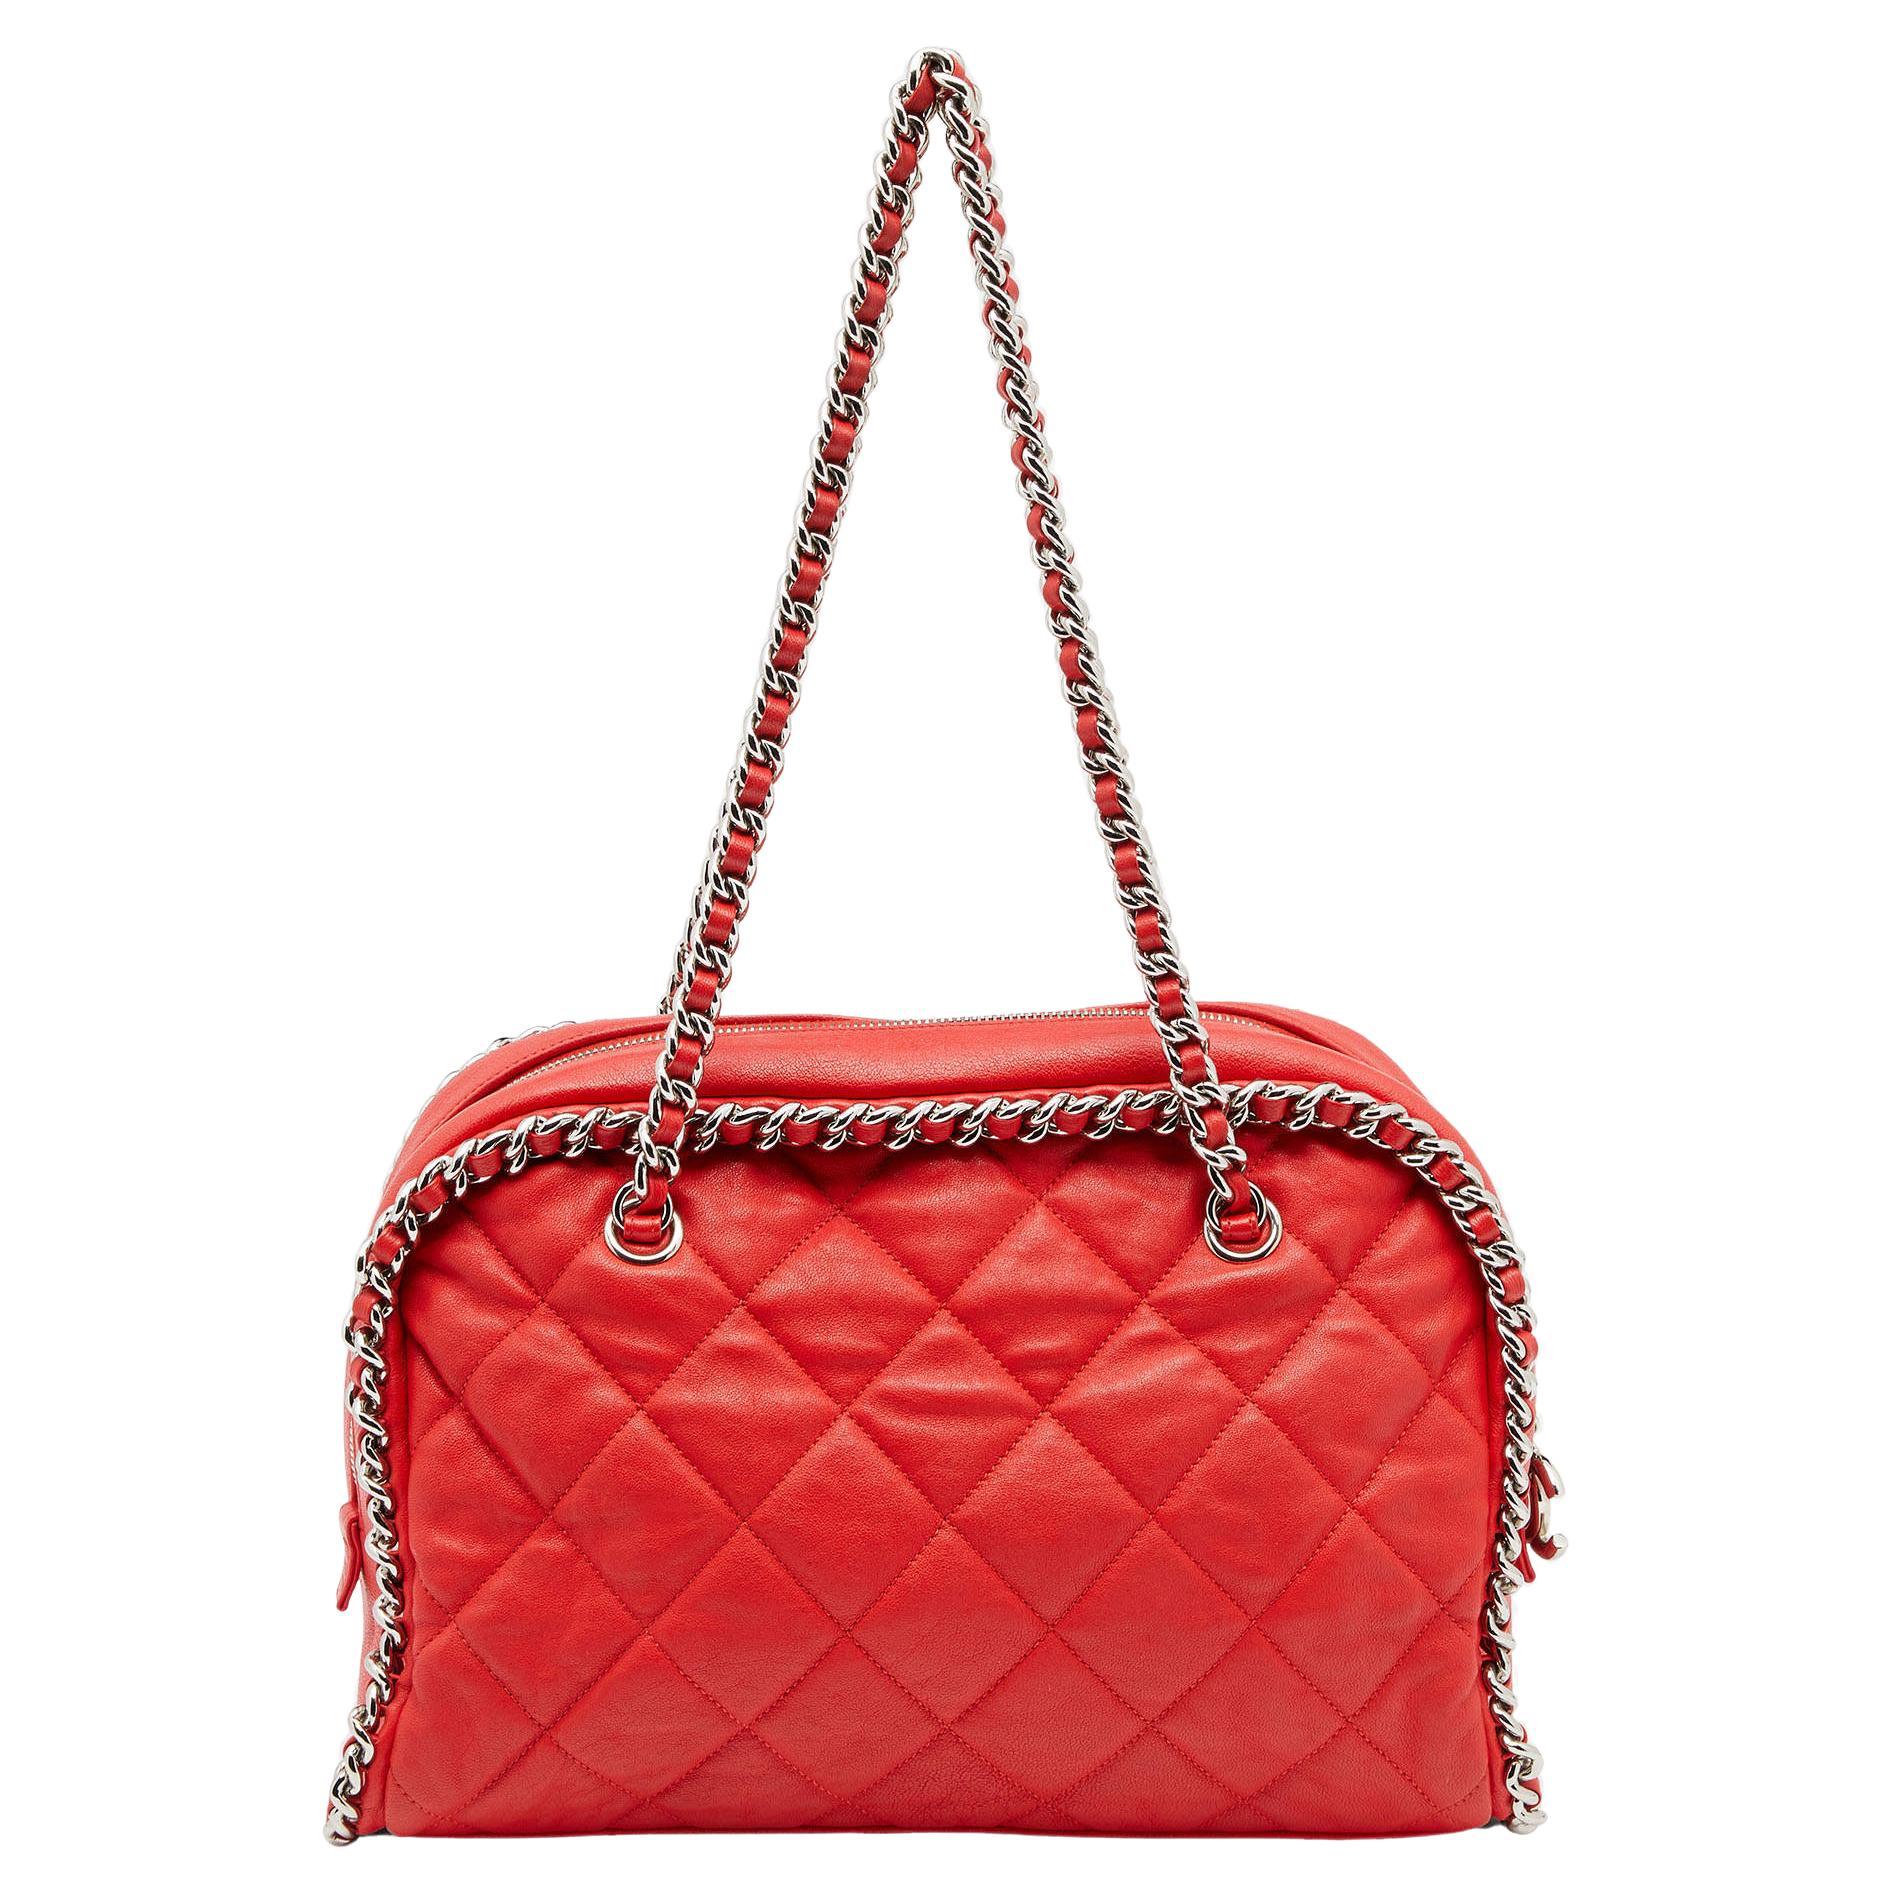 Chanel Red Quilted Leather Chain Around Bowler Bag